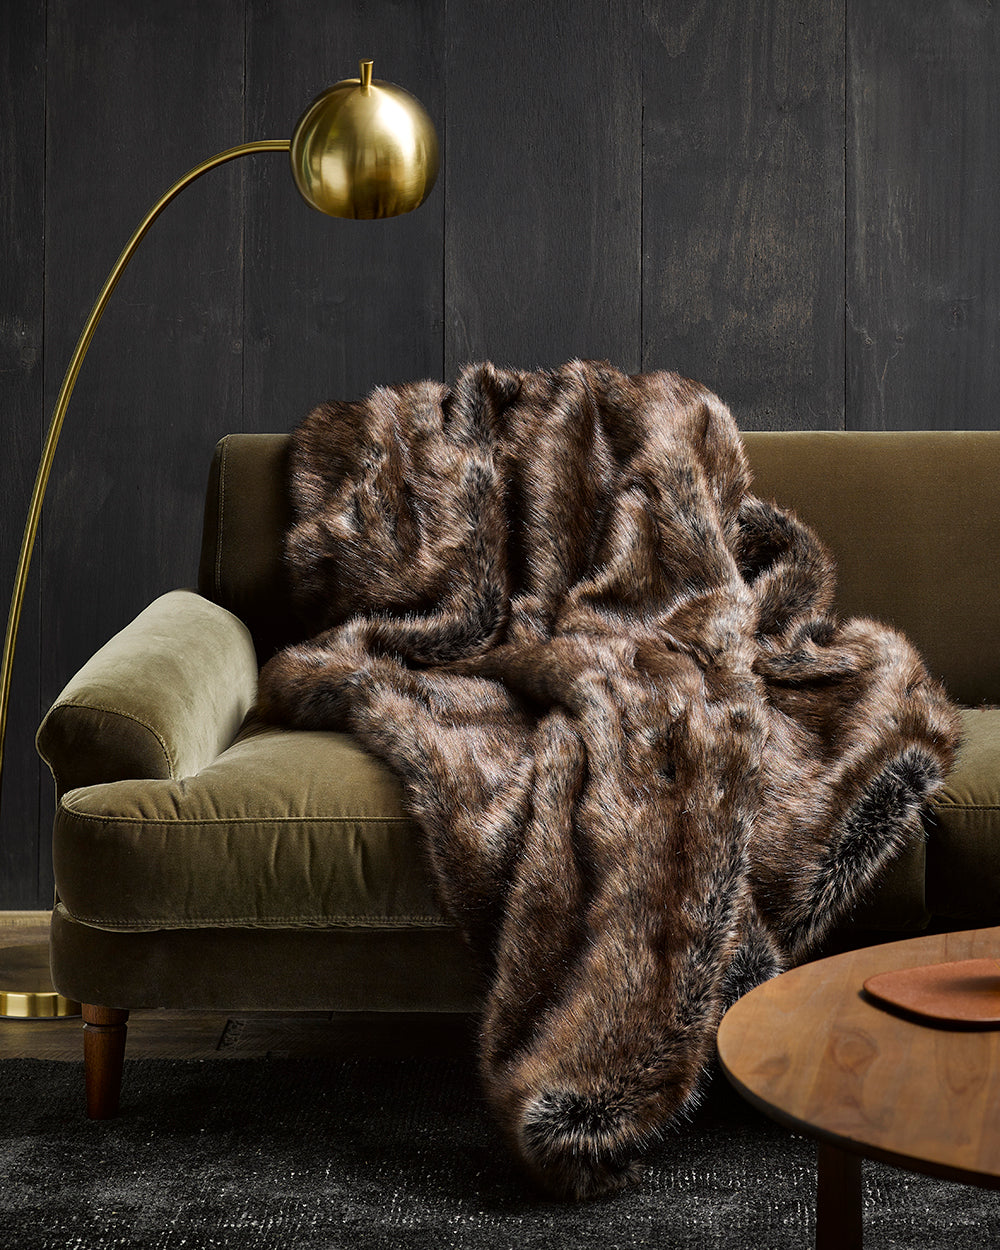 Imitation faux fur throw in Husky on green velvet sofa with gold light and wooden cofee table